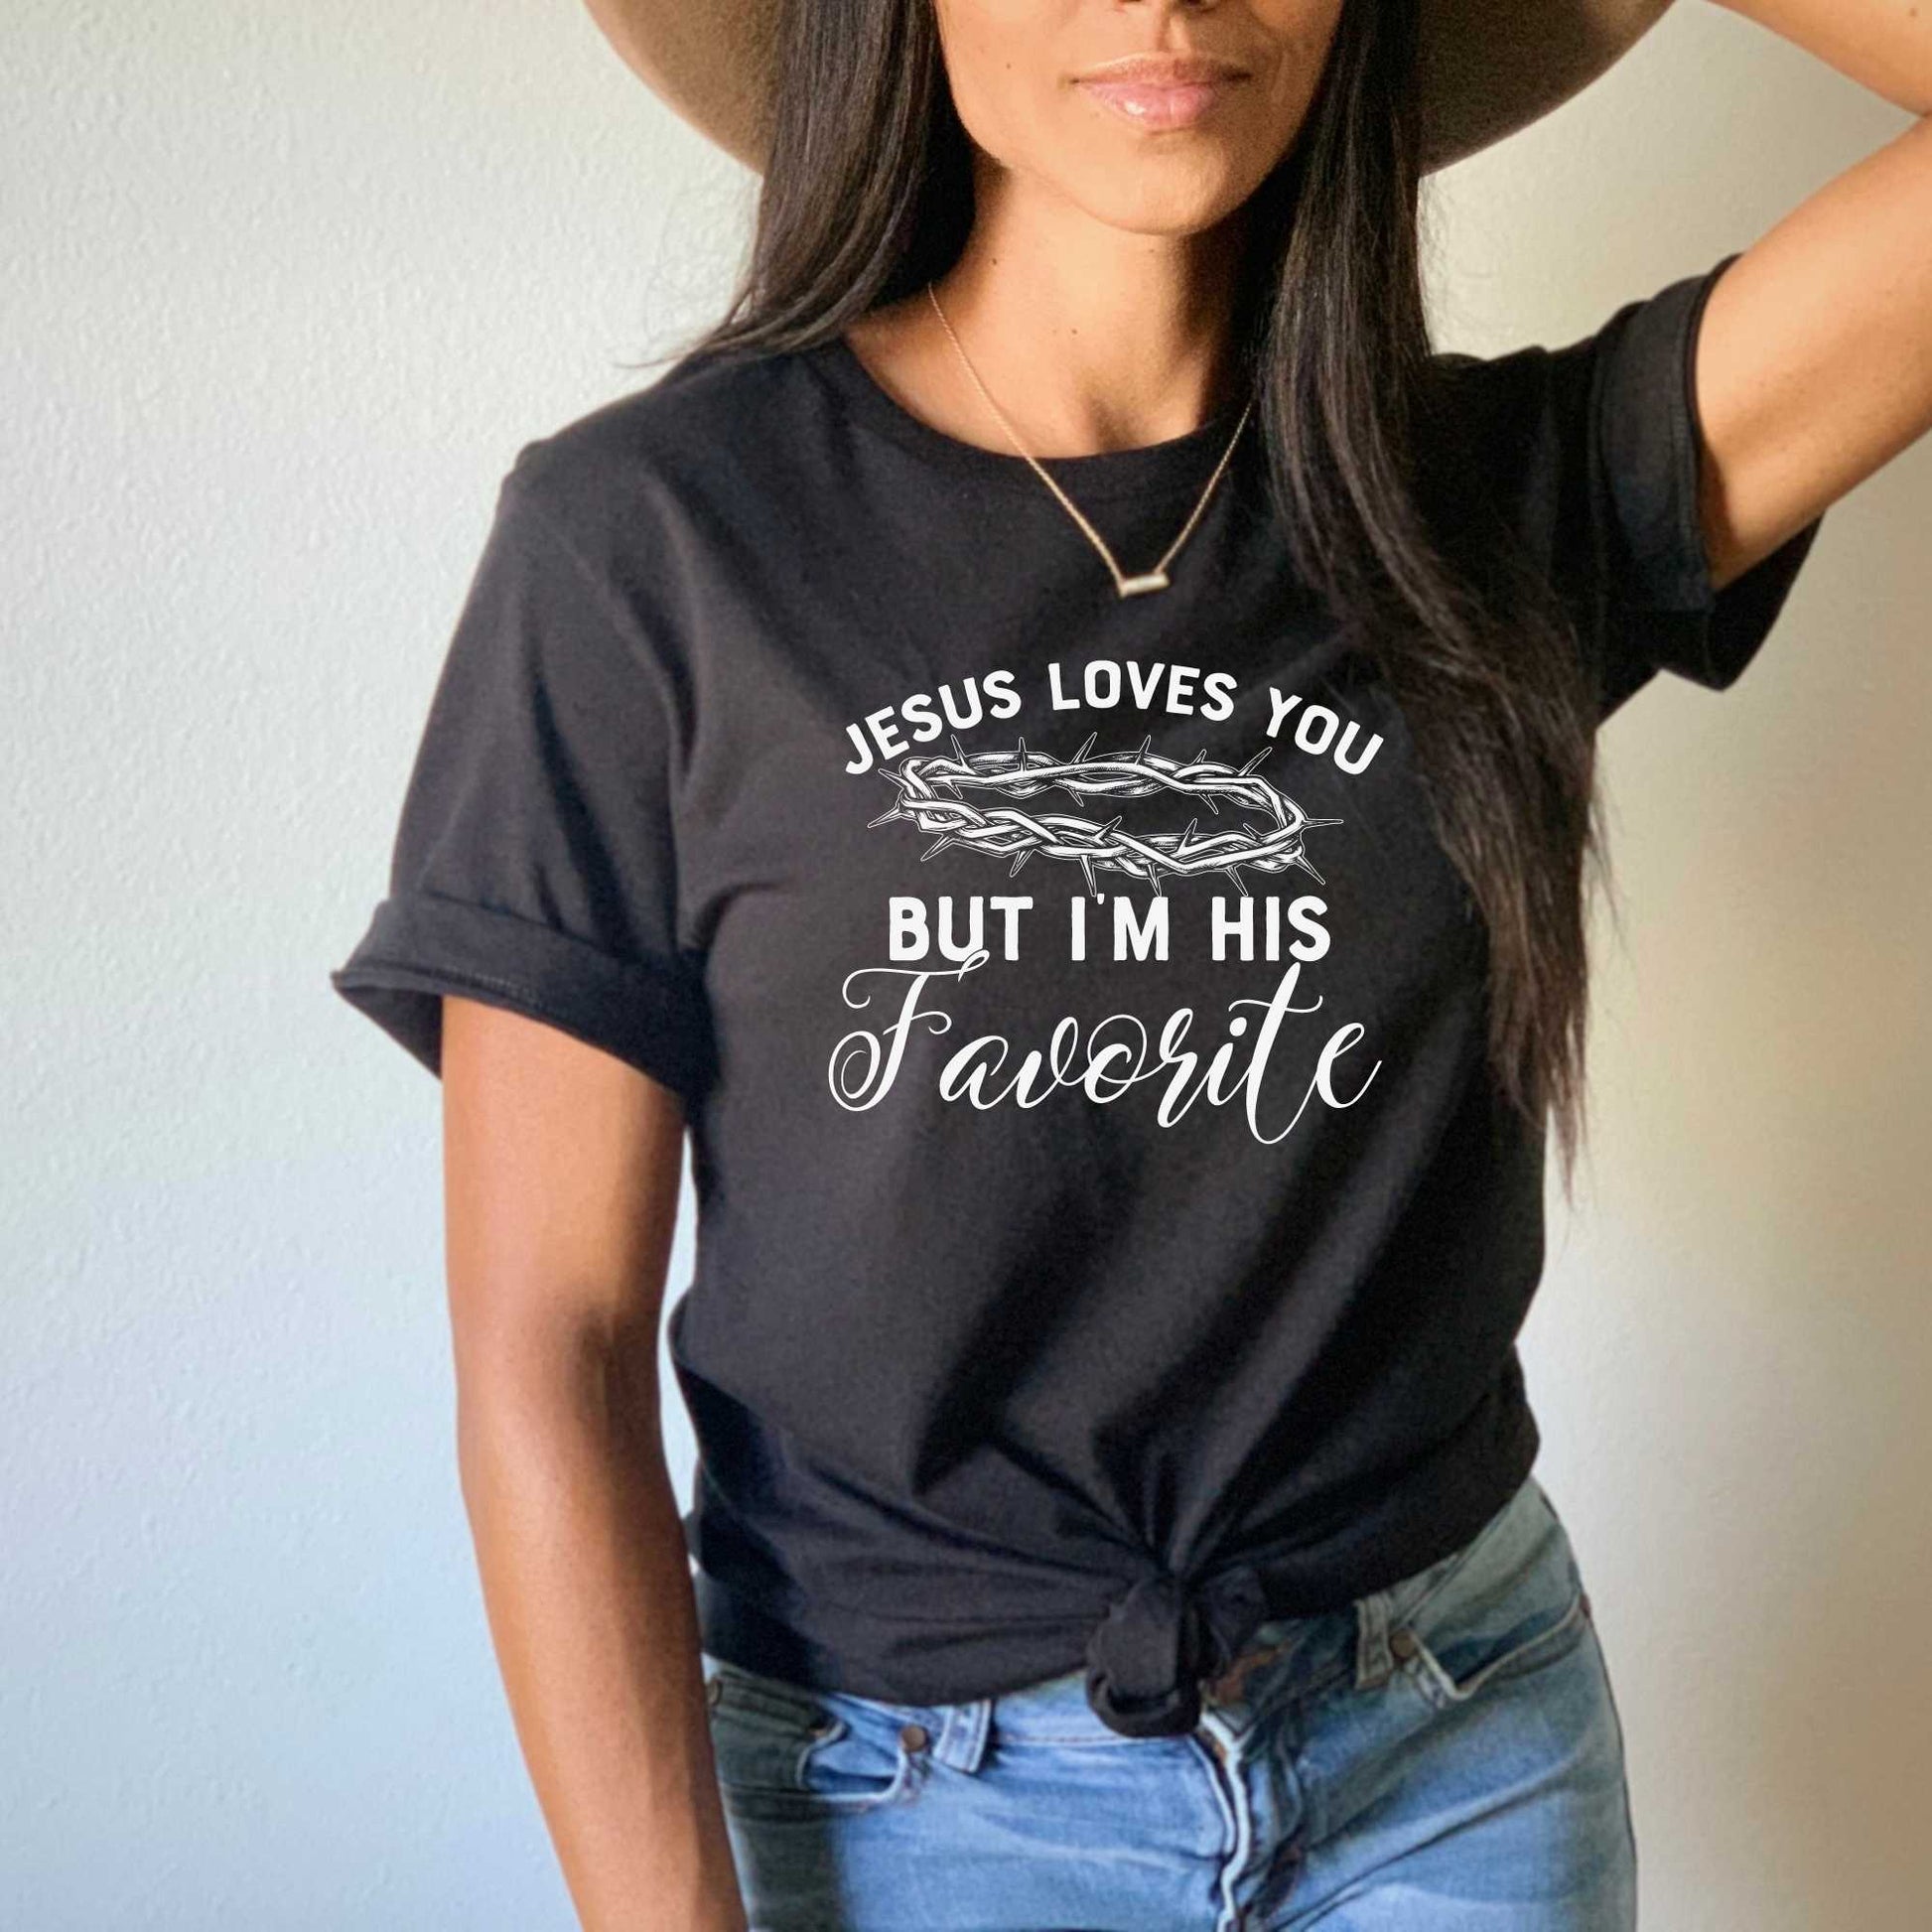 Jesus Loves You But I'm His Favorite, Funny Religious Shirts